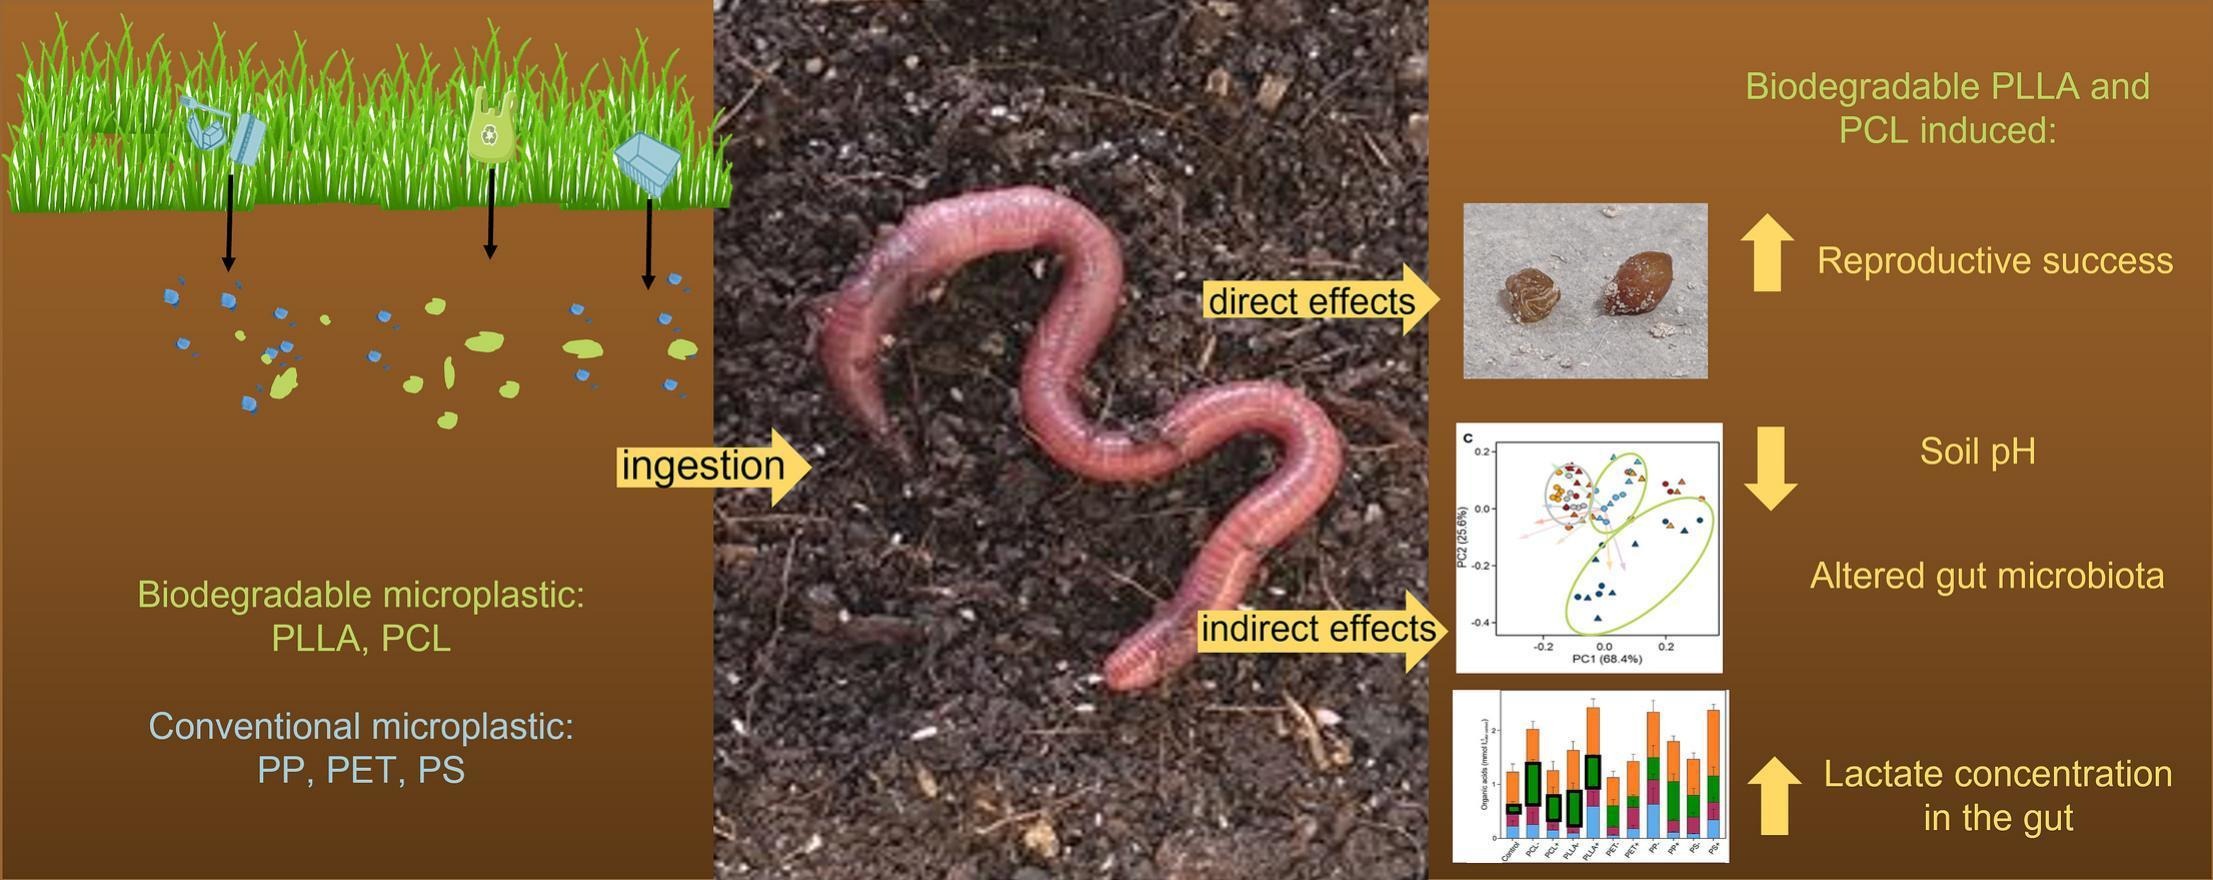 TOC_20230920_Biodegradable polymers boost reproduction in the earthworm Eisenia fetida